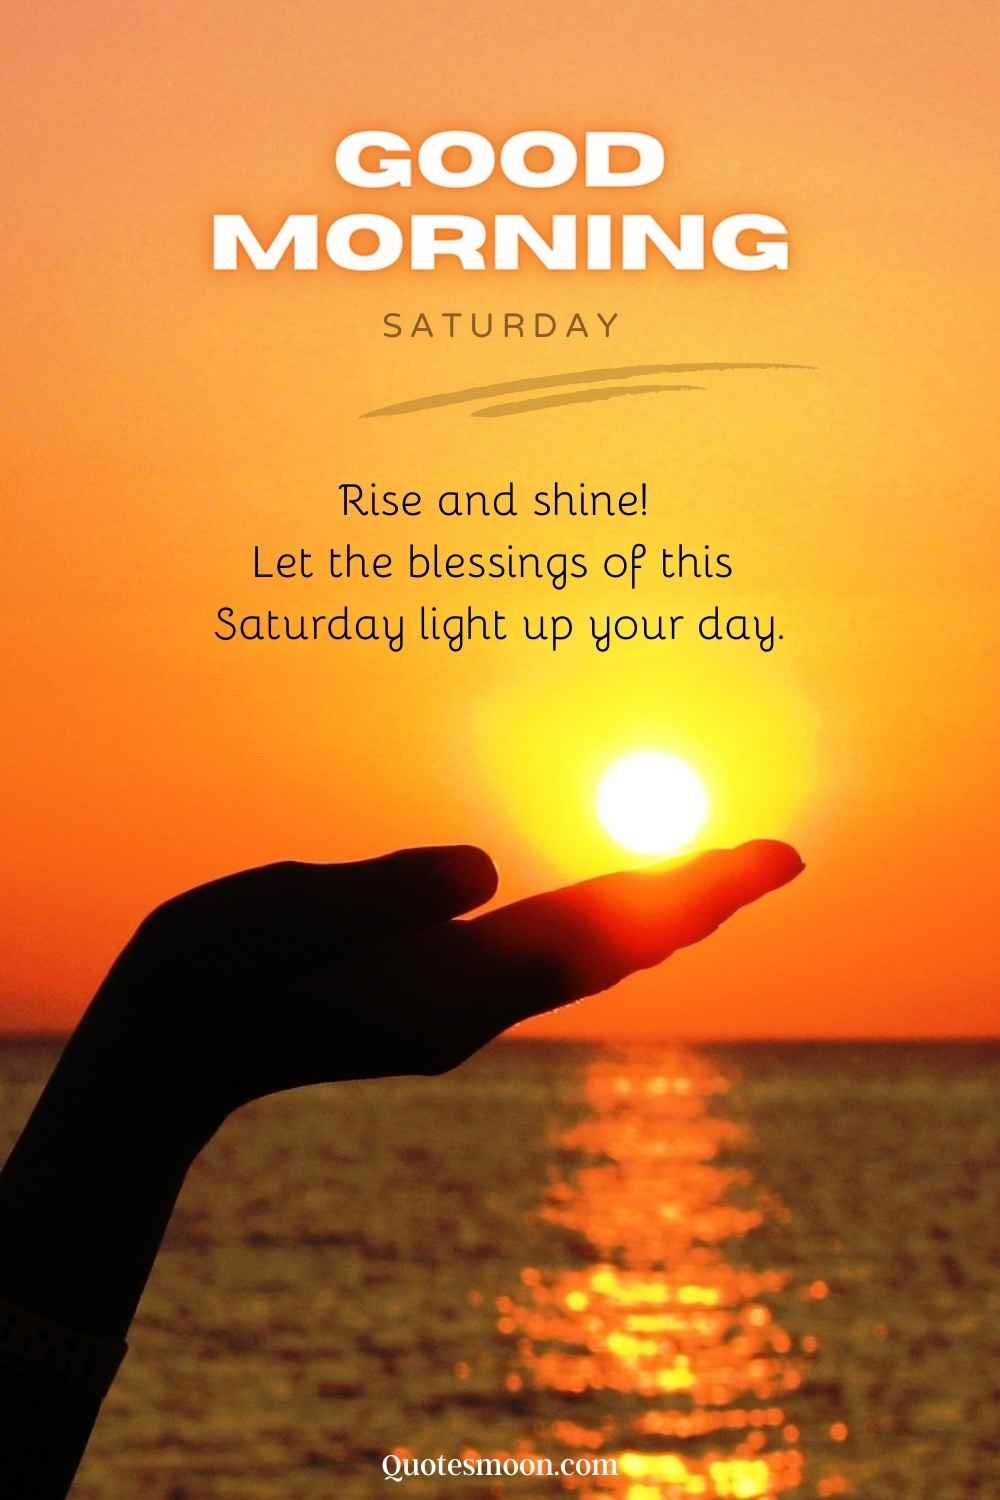 Saturday Morning with Inspirational Blessings quotes image